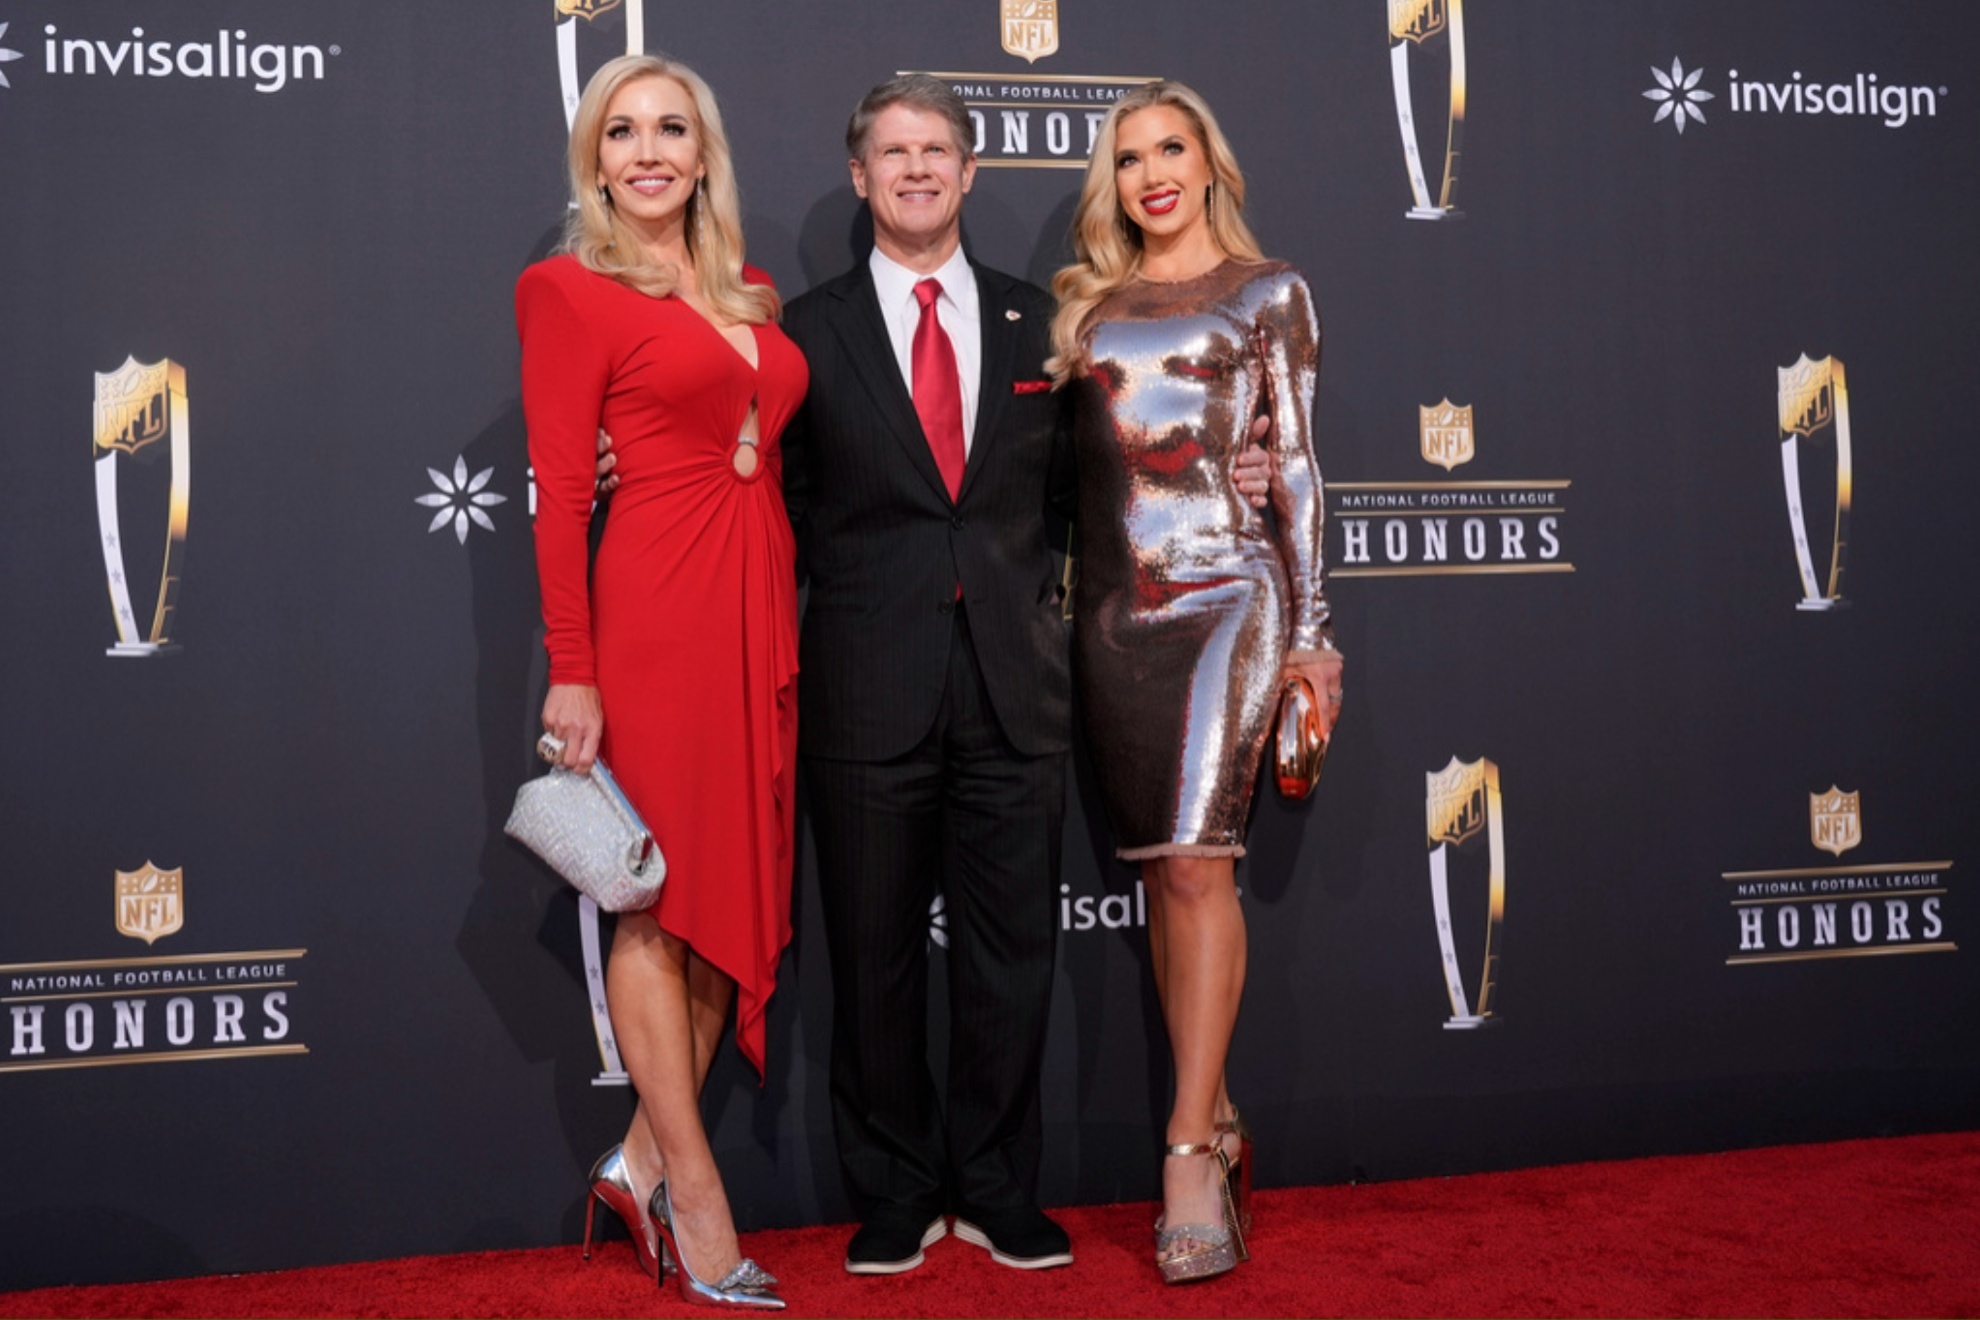 Clark Hunt is the second wealthiest team owner of the NFL. Here with his wife Tavia (L), and his daughter Gracie.